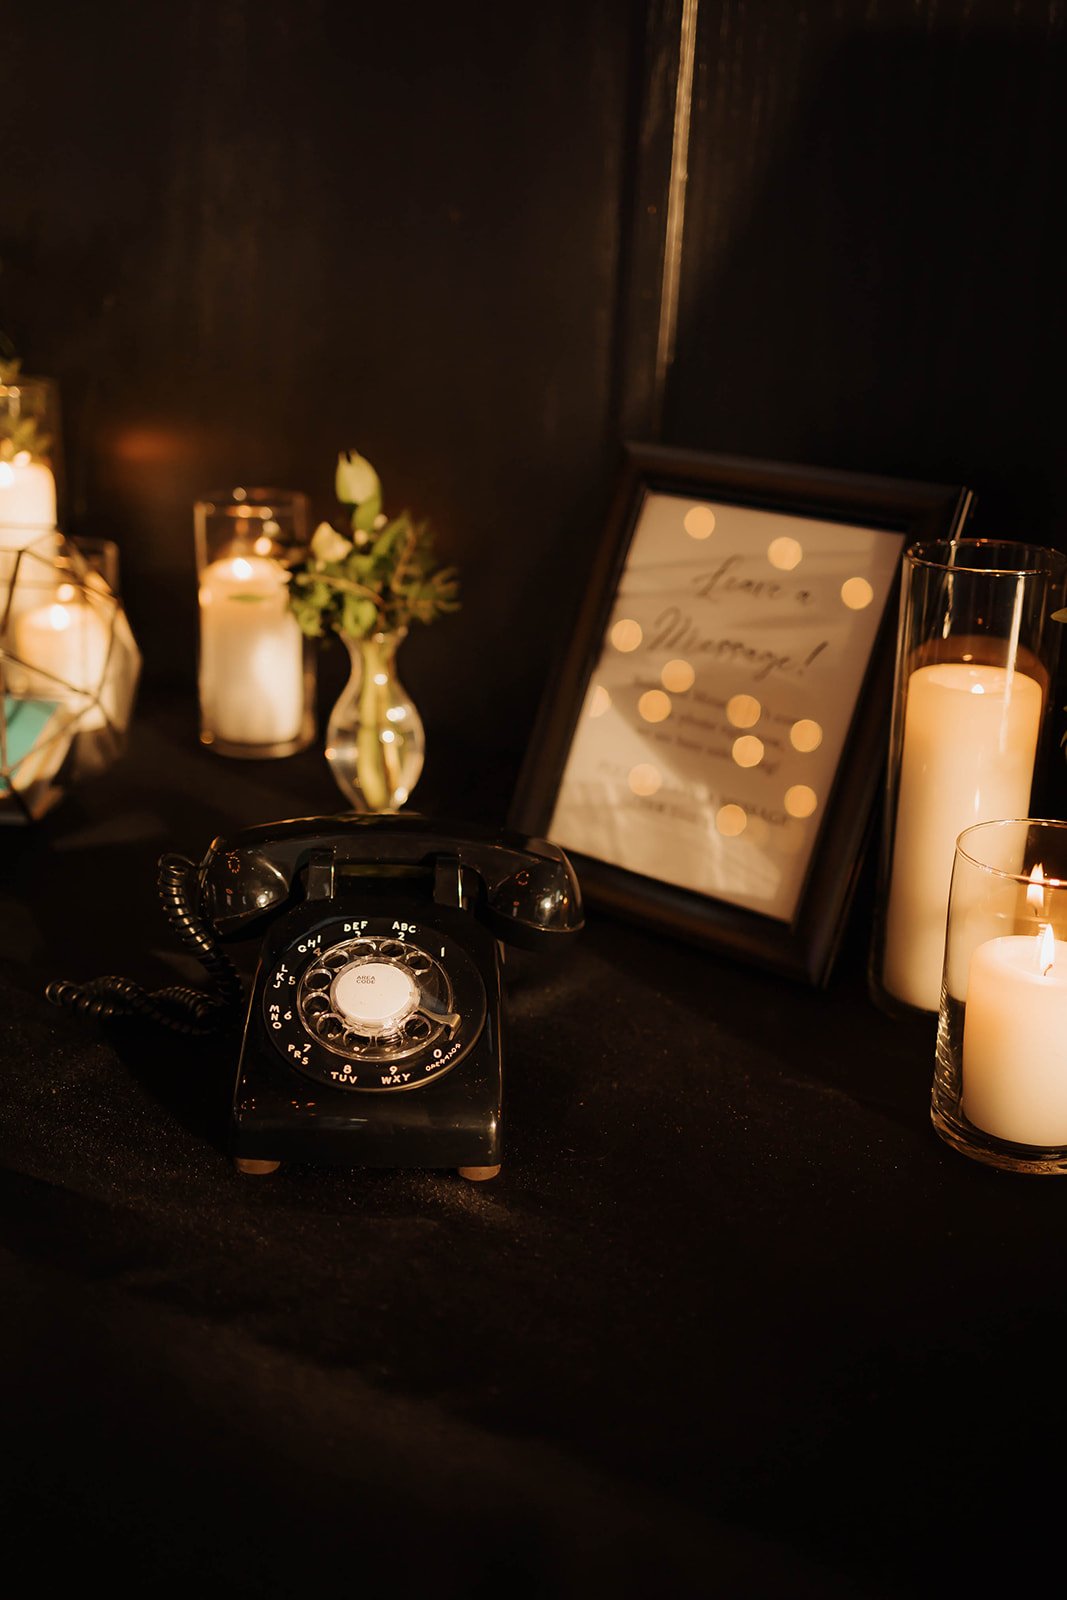  A black rotary phone sits on a table with a sign next to it that says “Leave A Message!”. White candles and a small vase of flowers frame the phone in the background.  